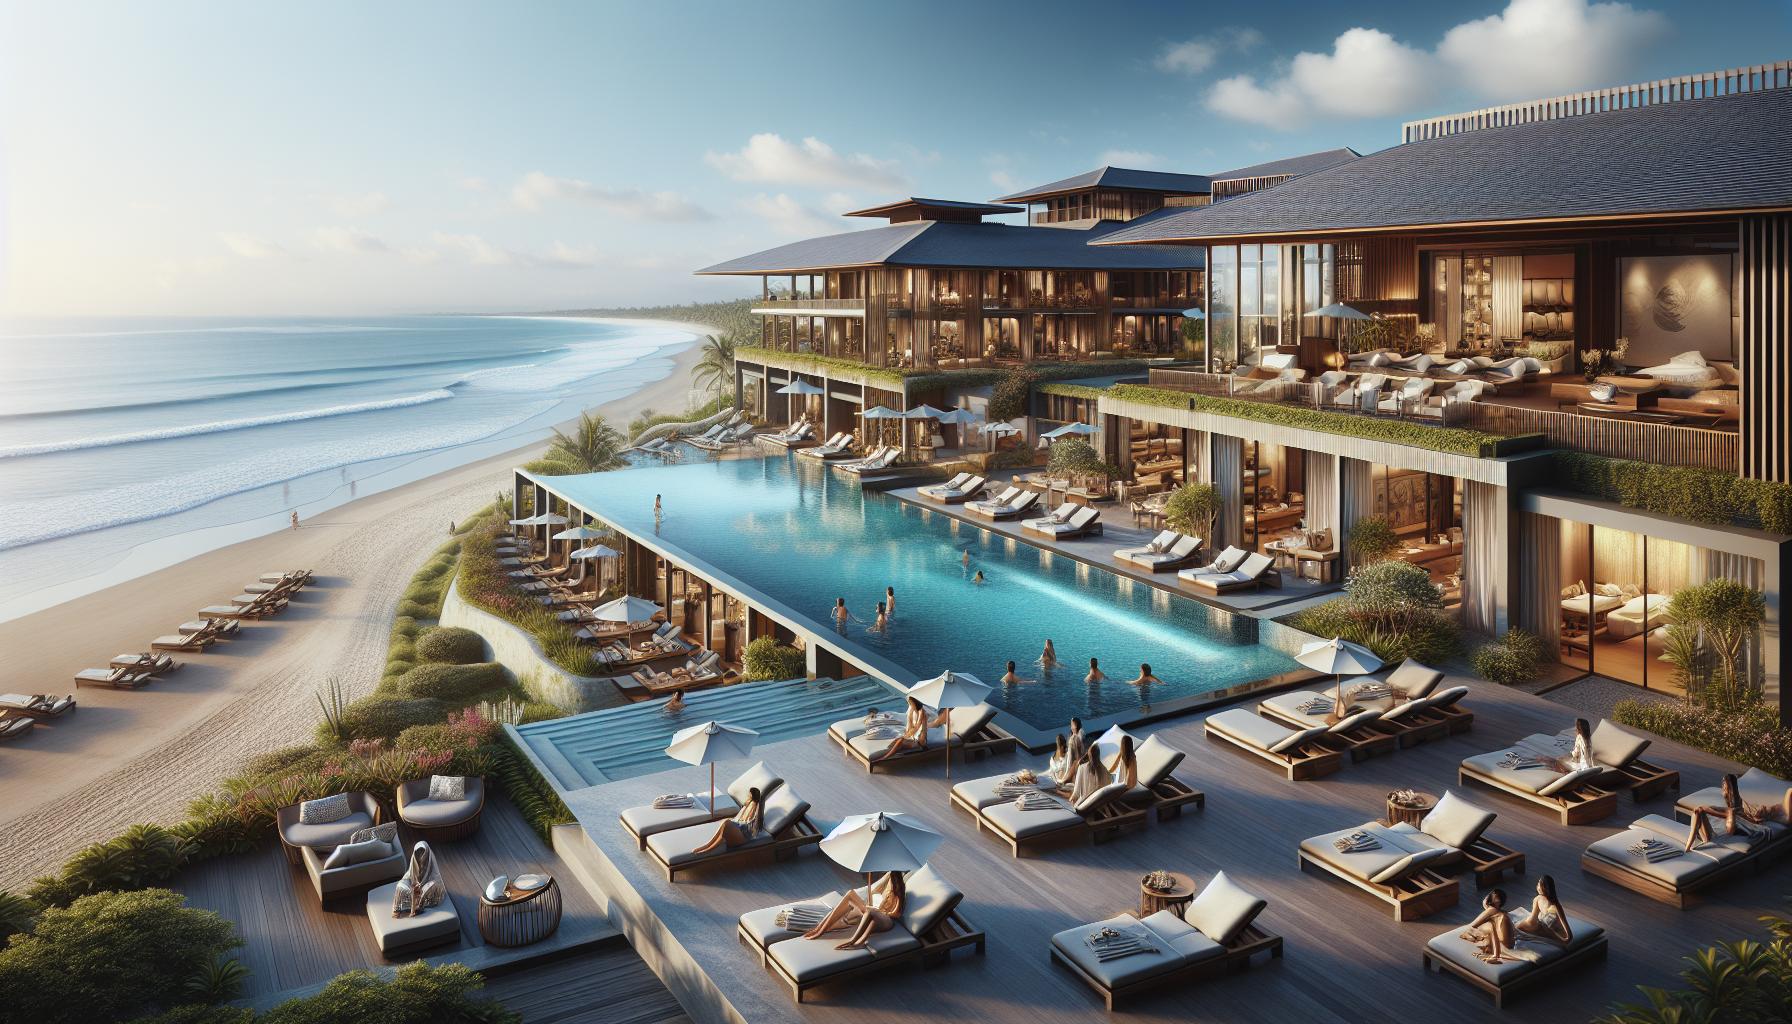 A real luxury vacation in Bali artistic image